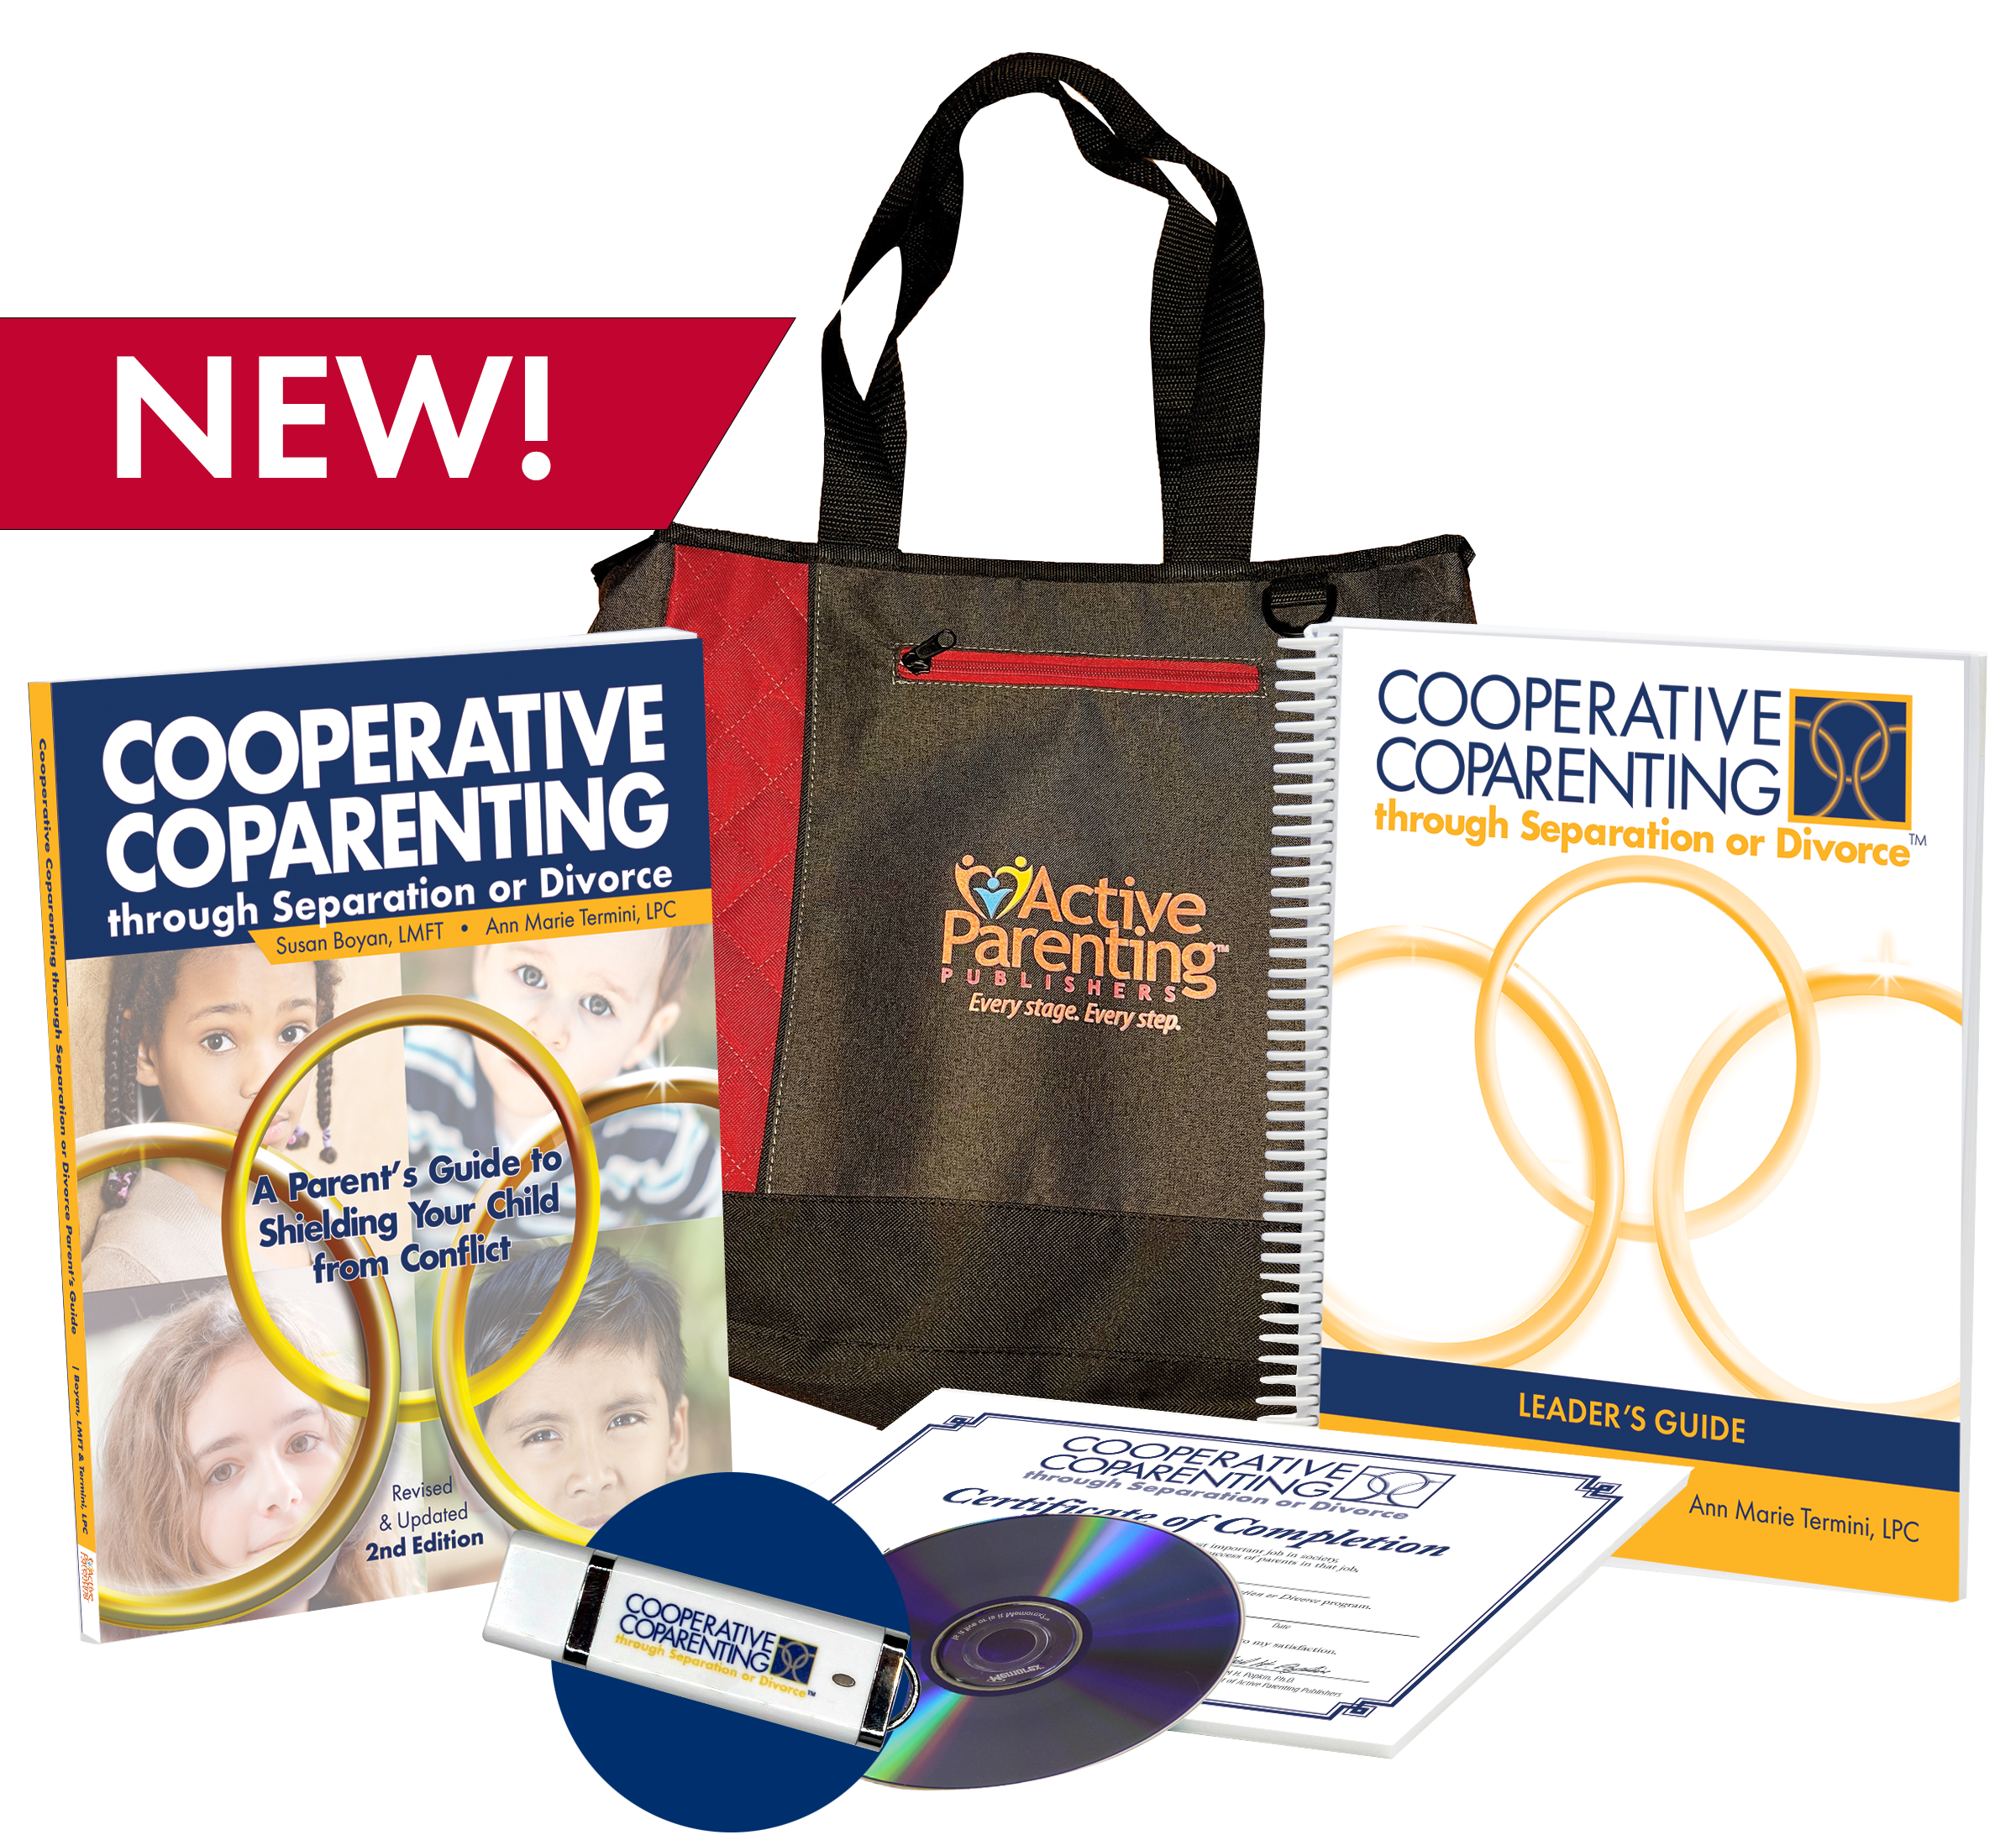 Cooperative Coparenting through Separation or Divorce kit with DVD or video embedded PowerPoint